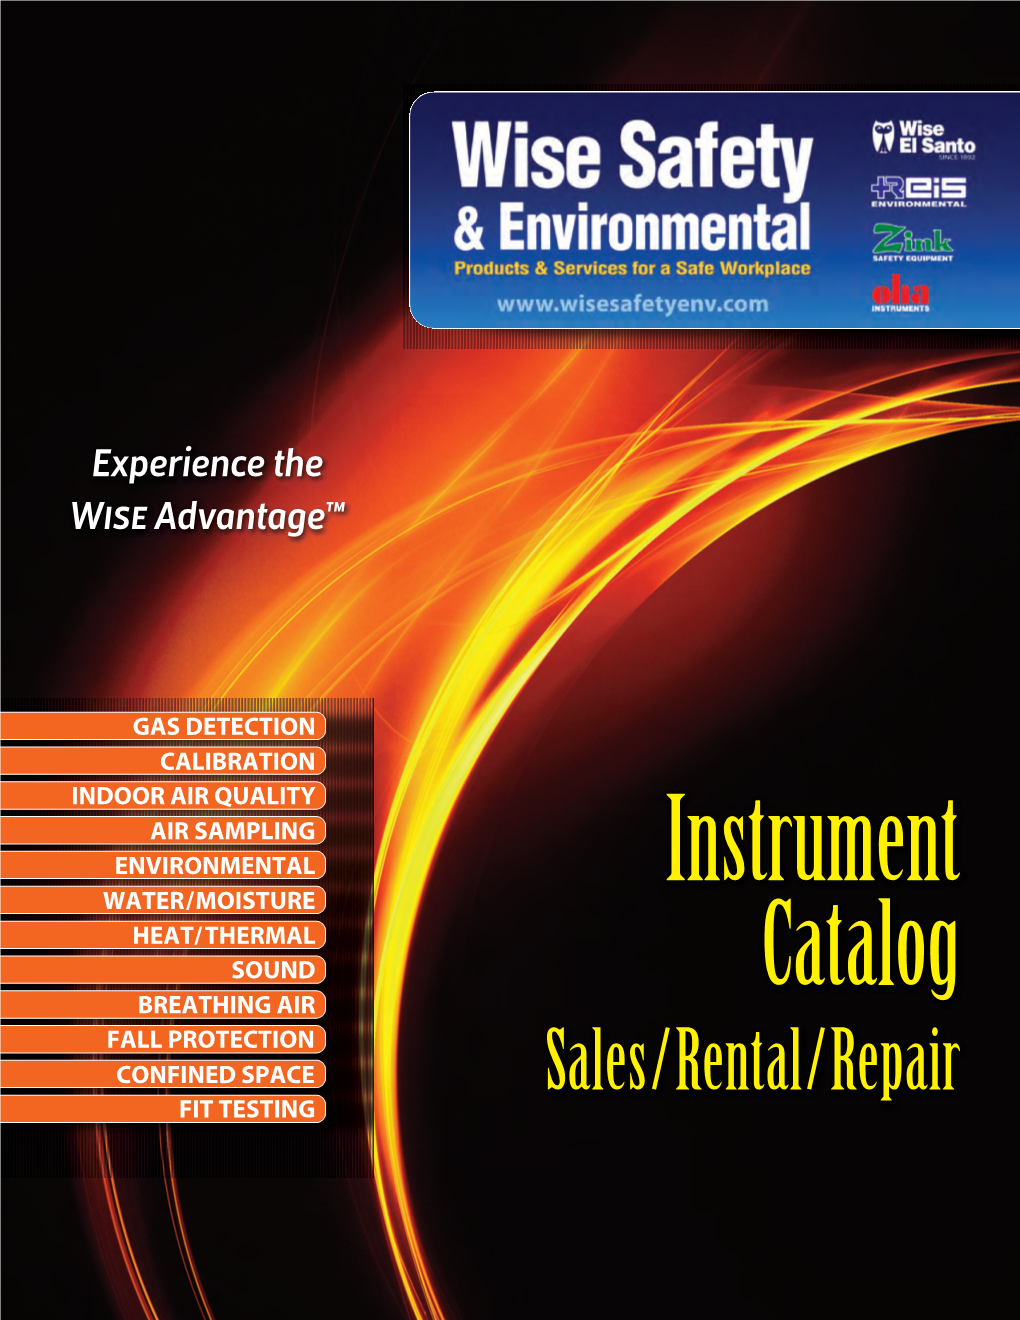 Sales/Rental/Repair FIT TESTING Instrument Catalog-2016 E Instrument Catalog-2016 Resaved II 7/14/16 2:35 PM Page 2